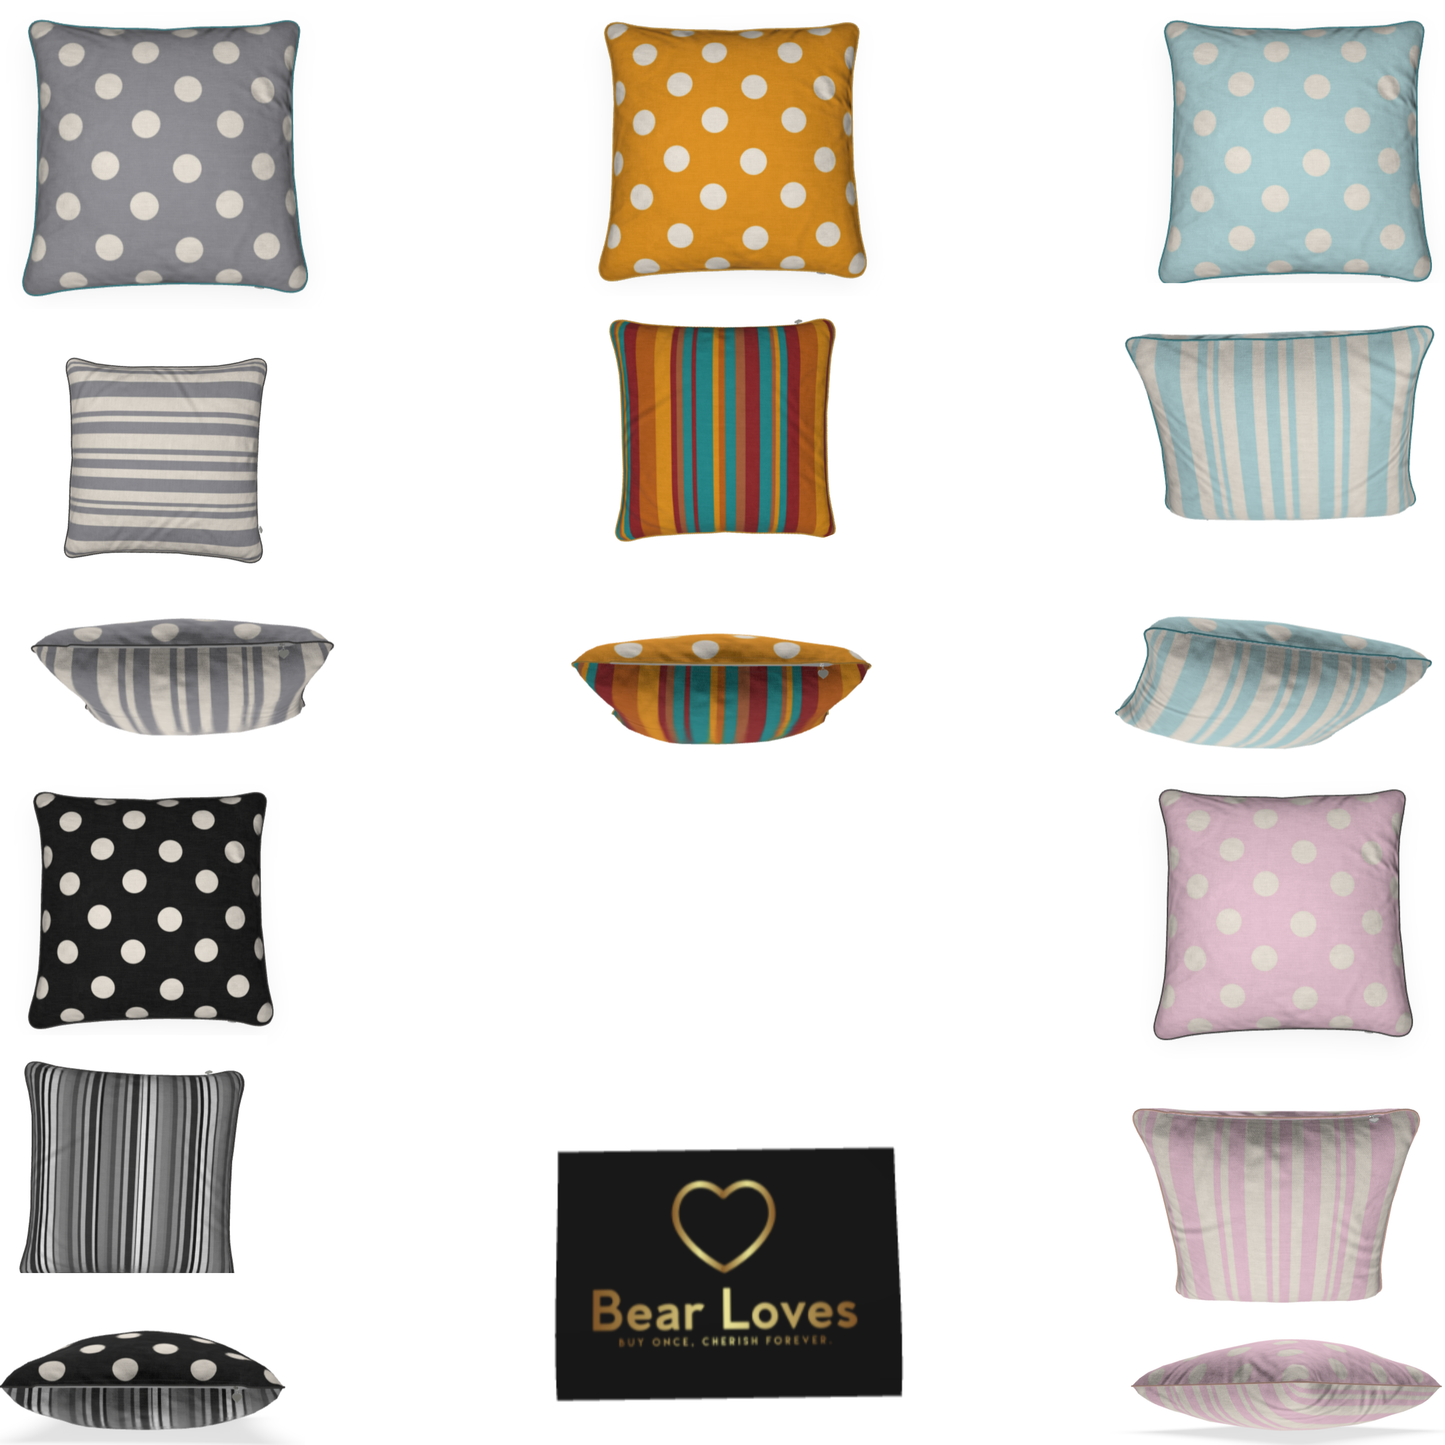 Polka Dot and Stripes Cushions and Covers in 100% Natural Cotton and Linen